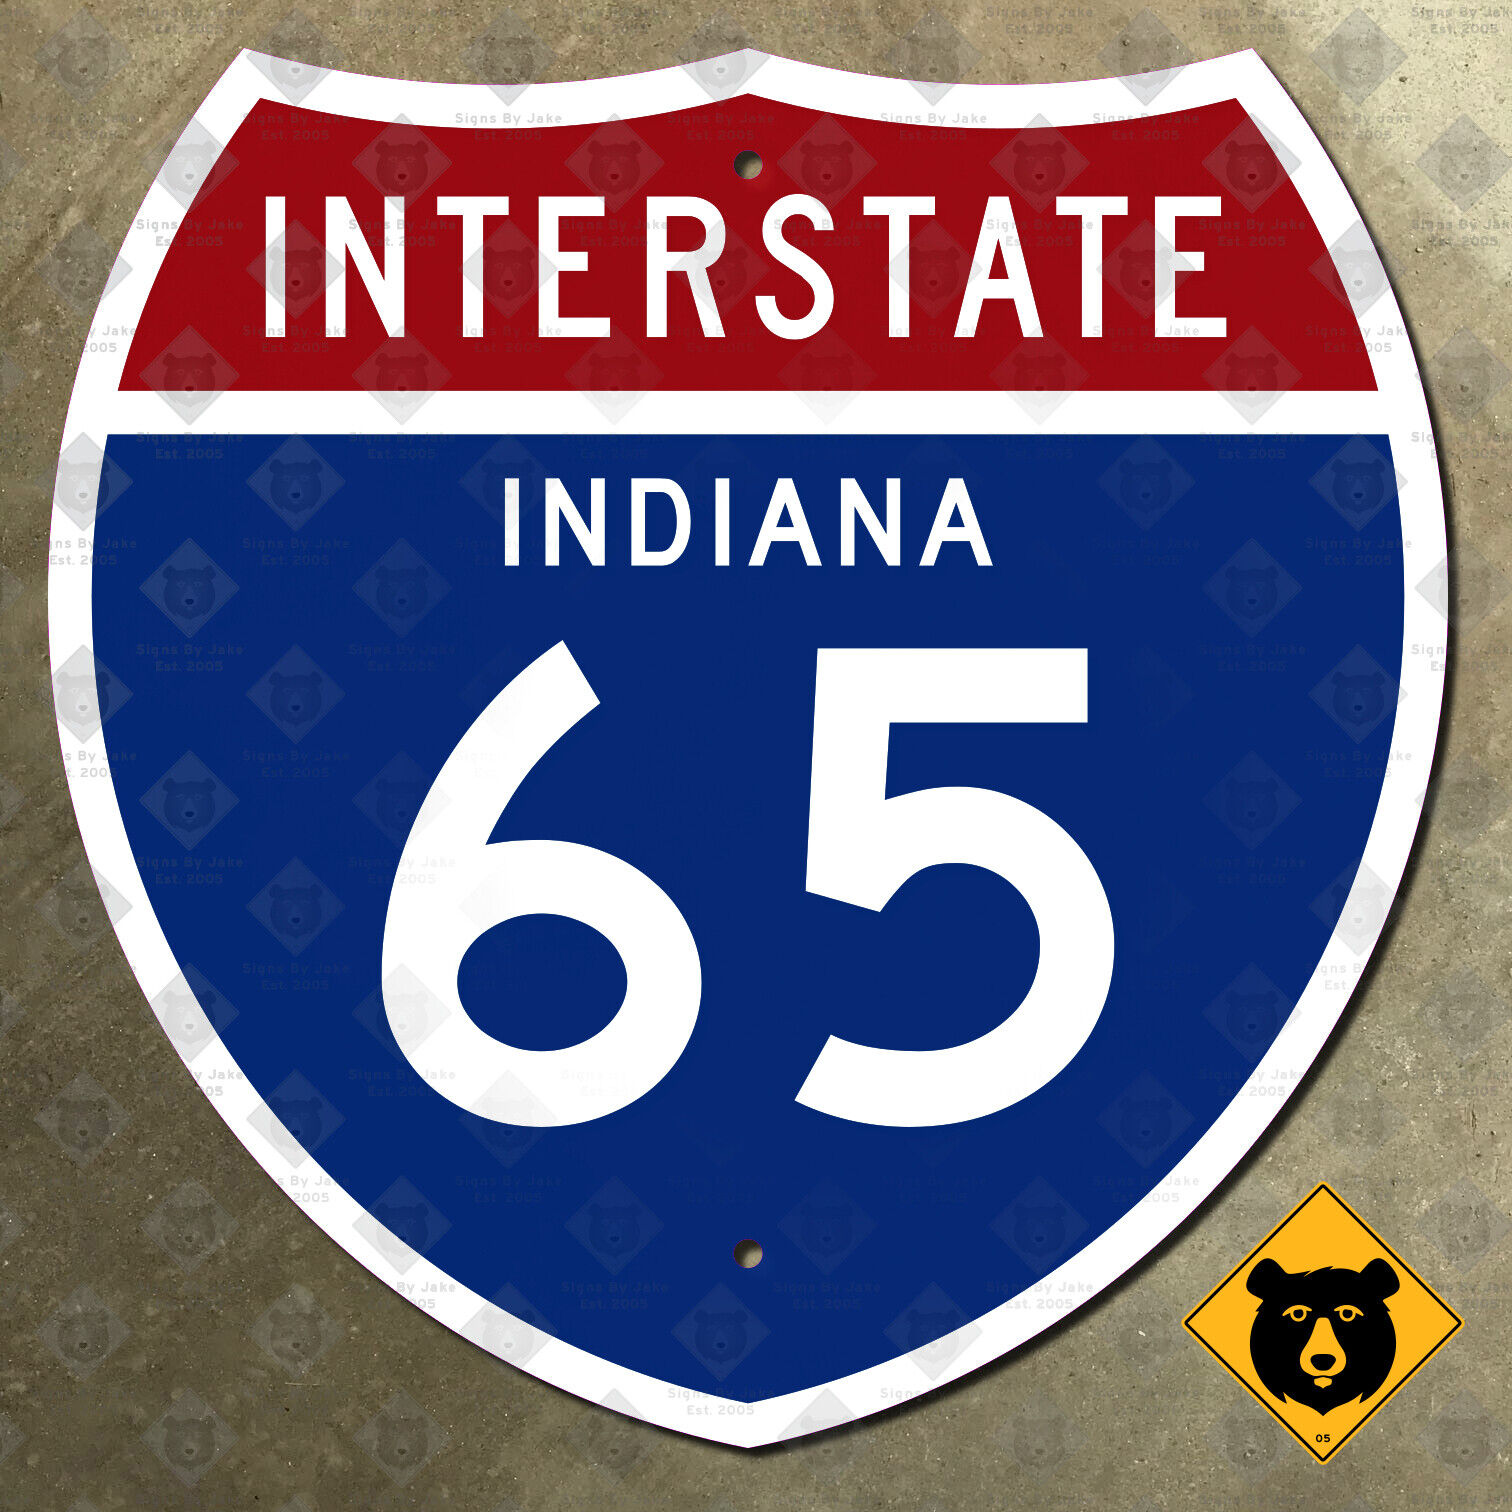 Indiana Interstate 65 highway route marker road sign Indianapolis Chicago 18x18